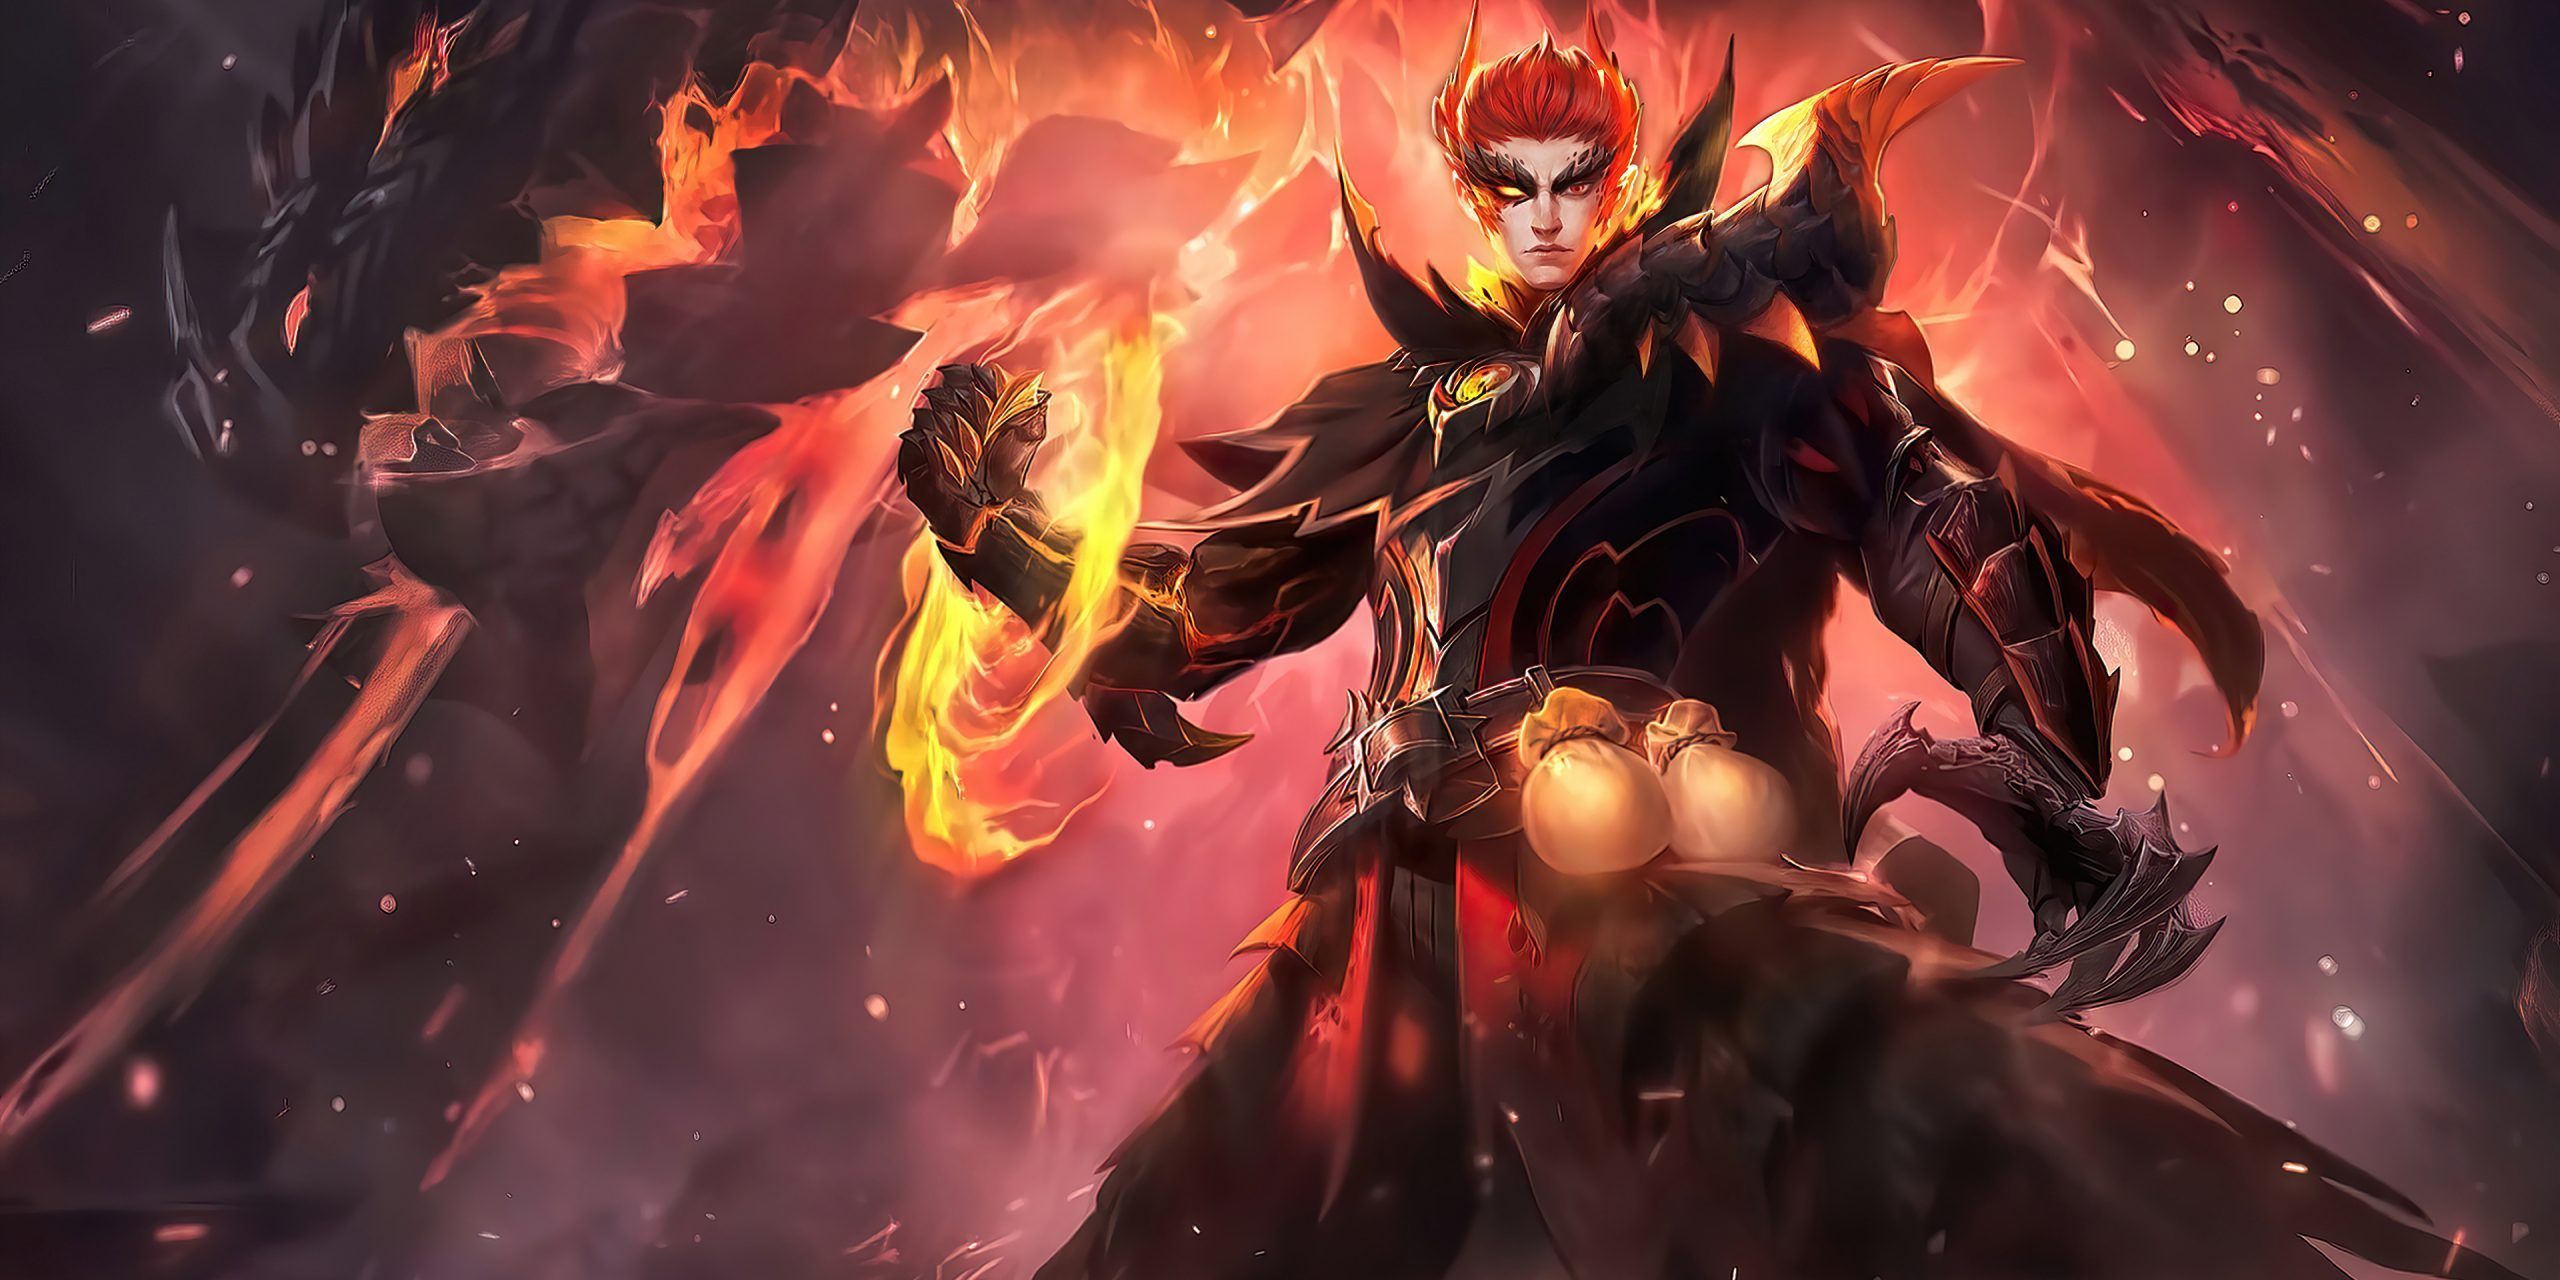 Wallpaper HD Dragon Tamer Skin Edition Mobile Legends For PC and Phone